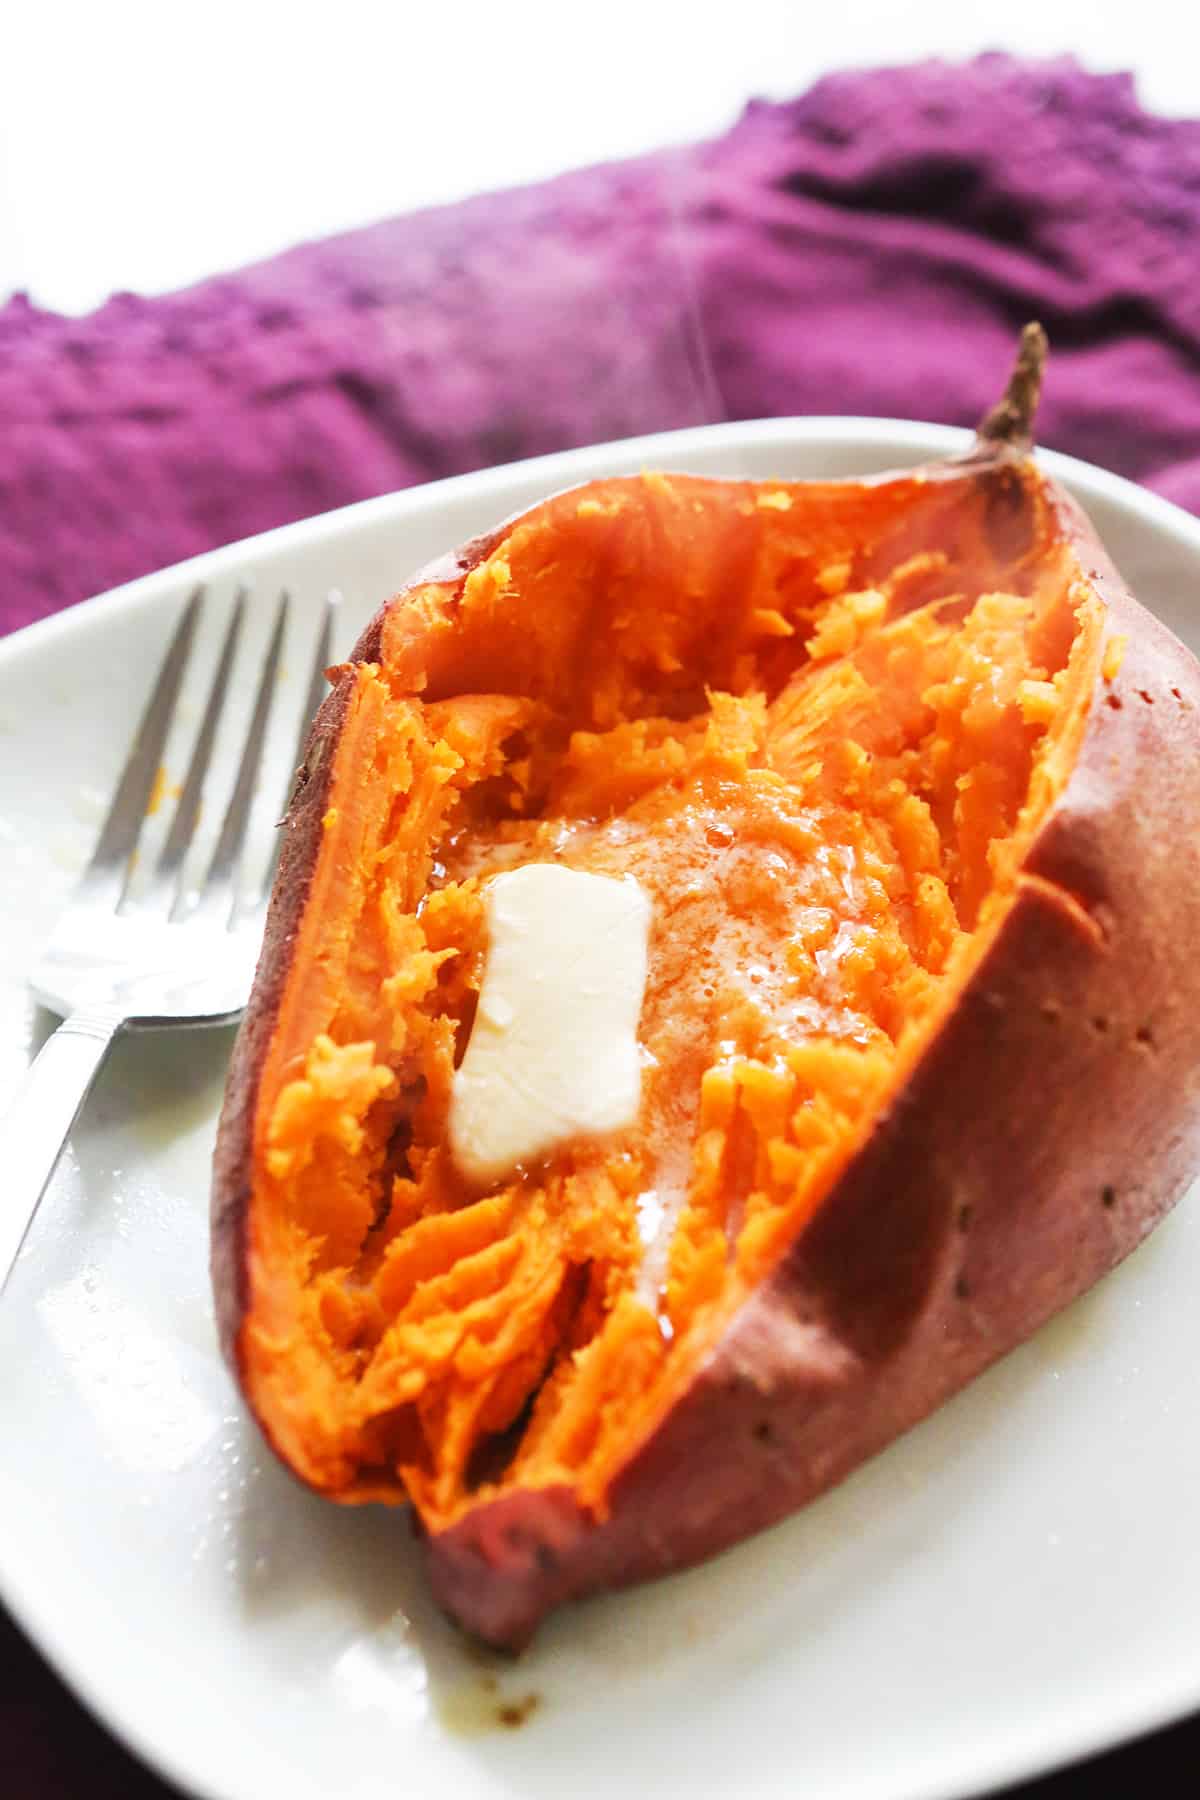 Perfectly cooked sweet potato with a pat of butter melting in the center.